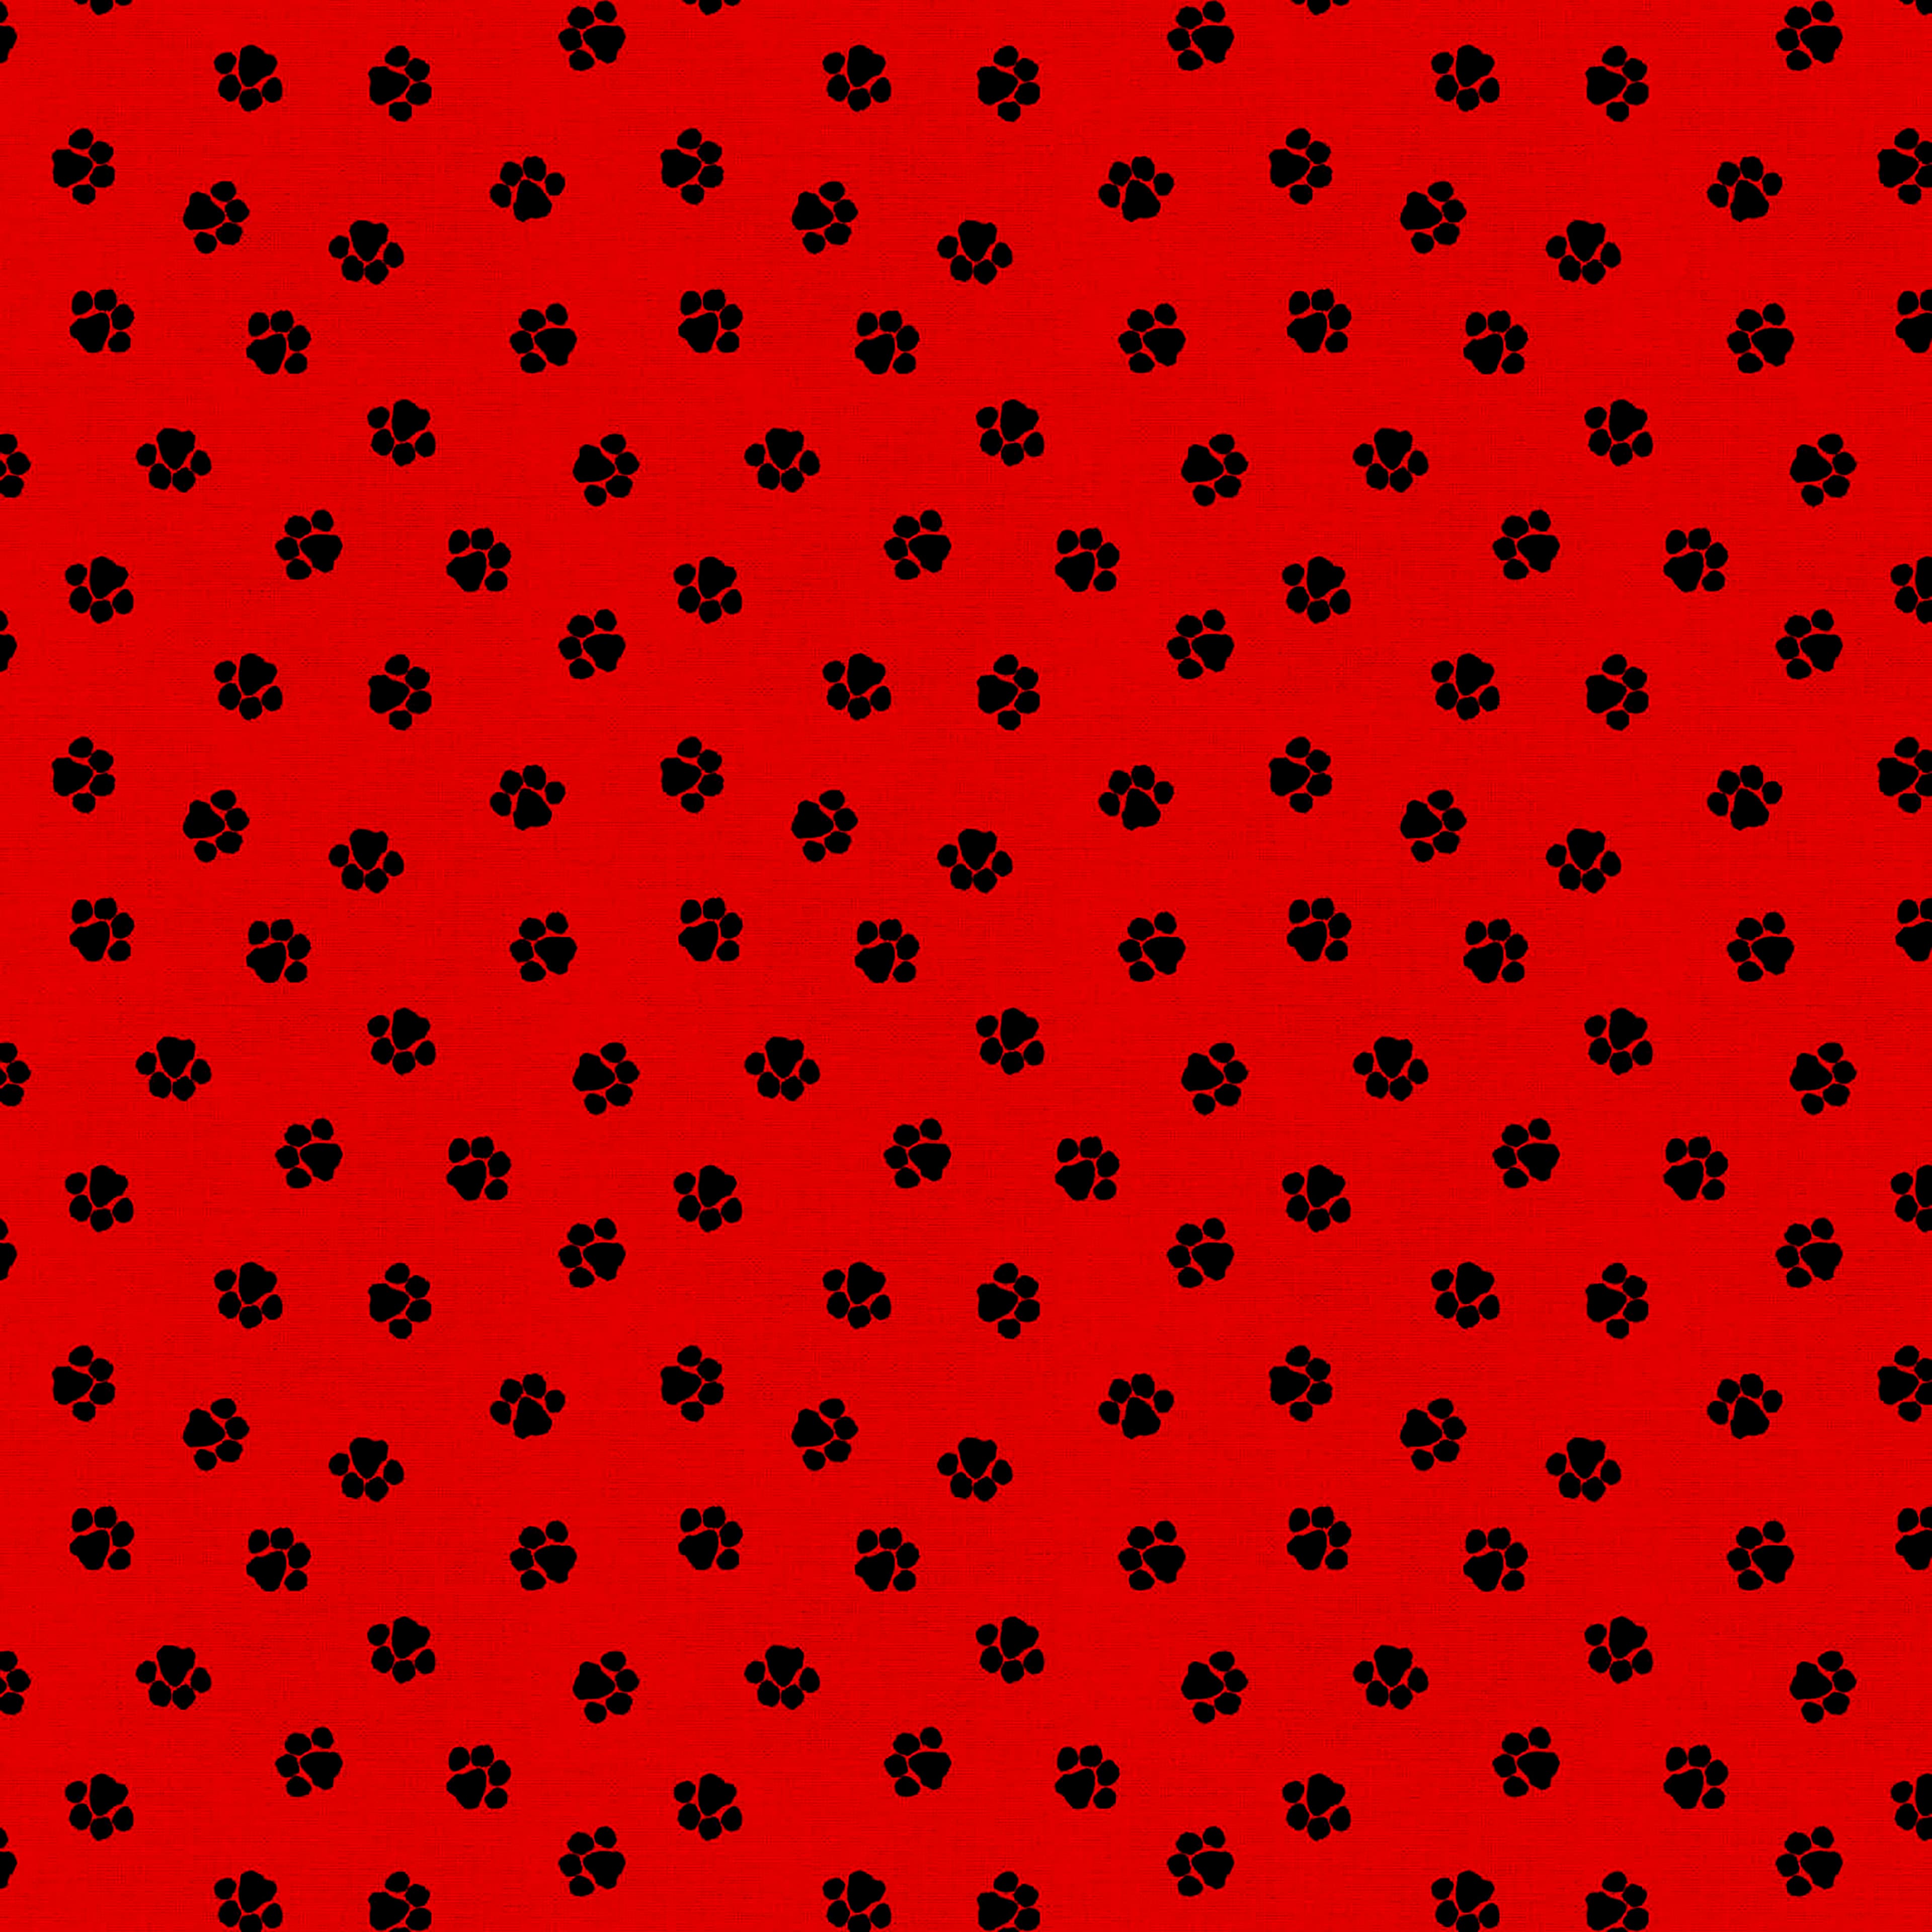 Fabric Editions Red Paw Print Cotton Fabric